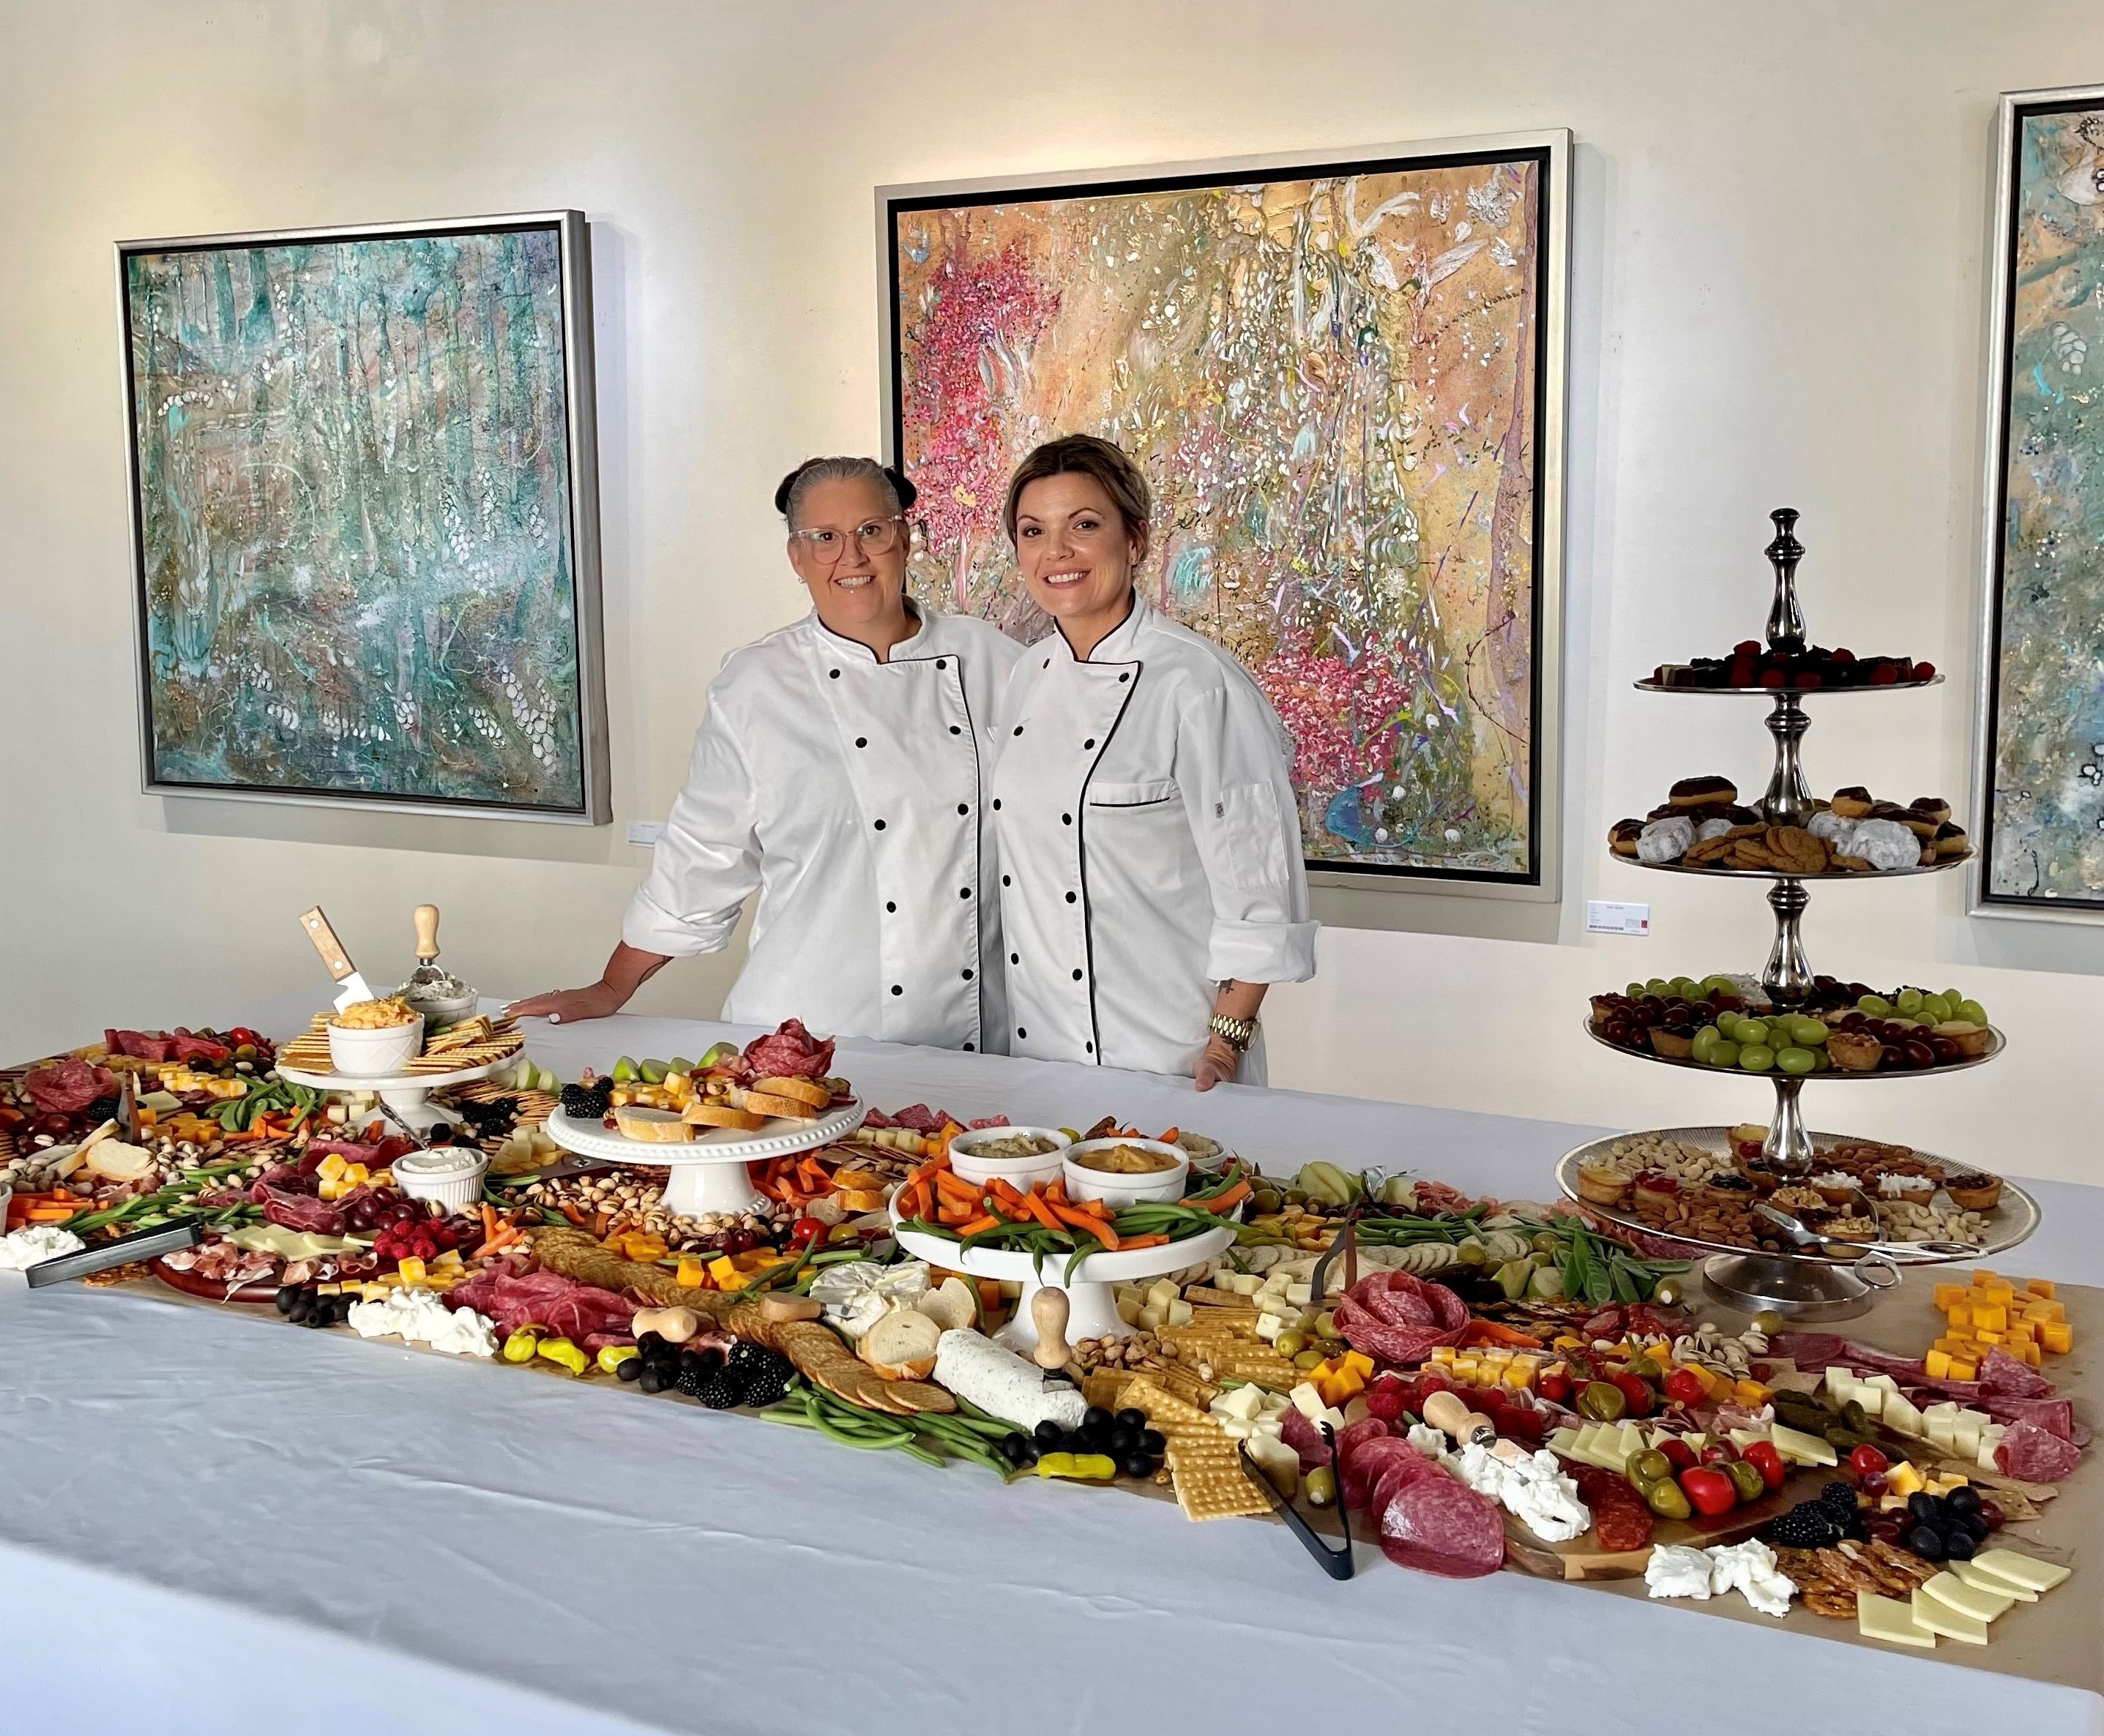 Chefs smile behind a table of charcuterie in front of framed abstract paintings